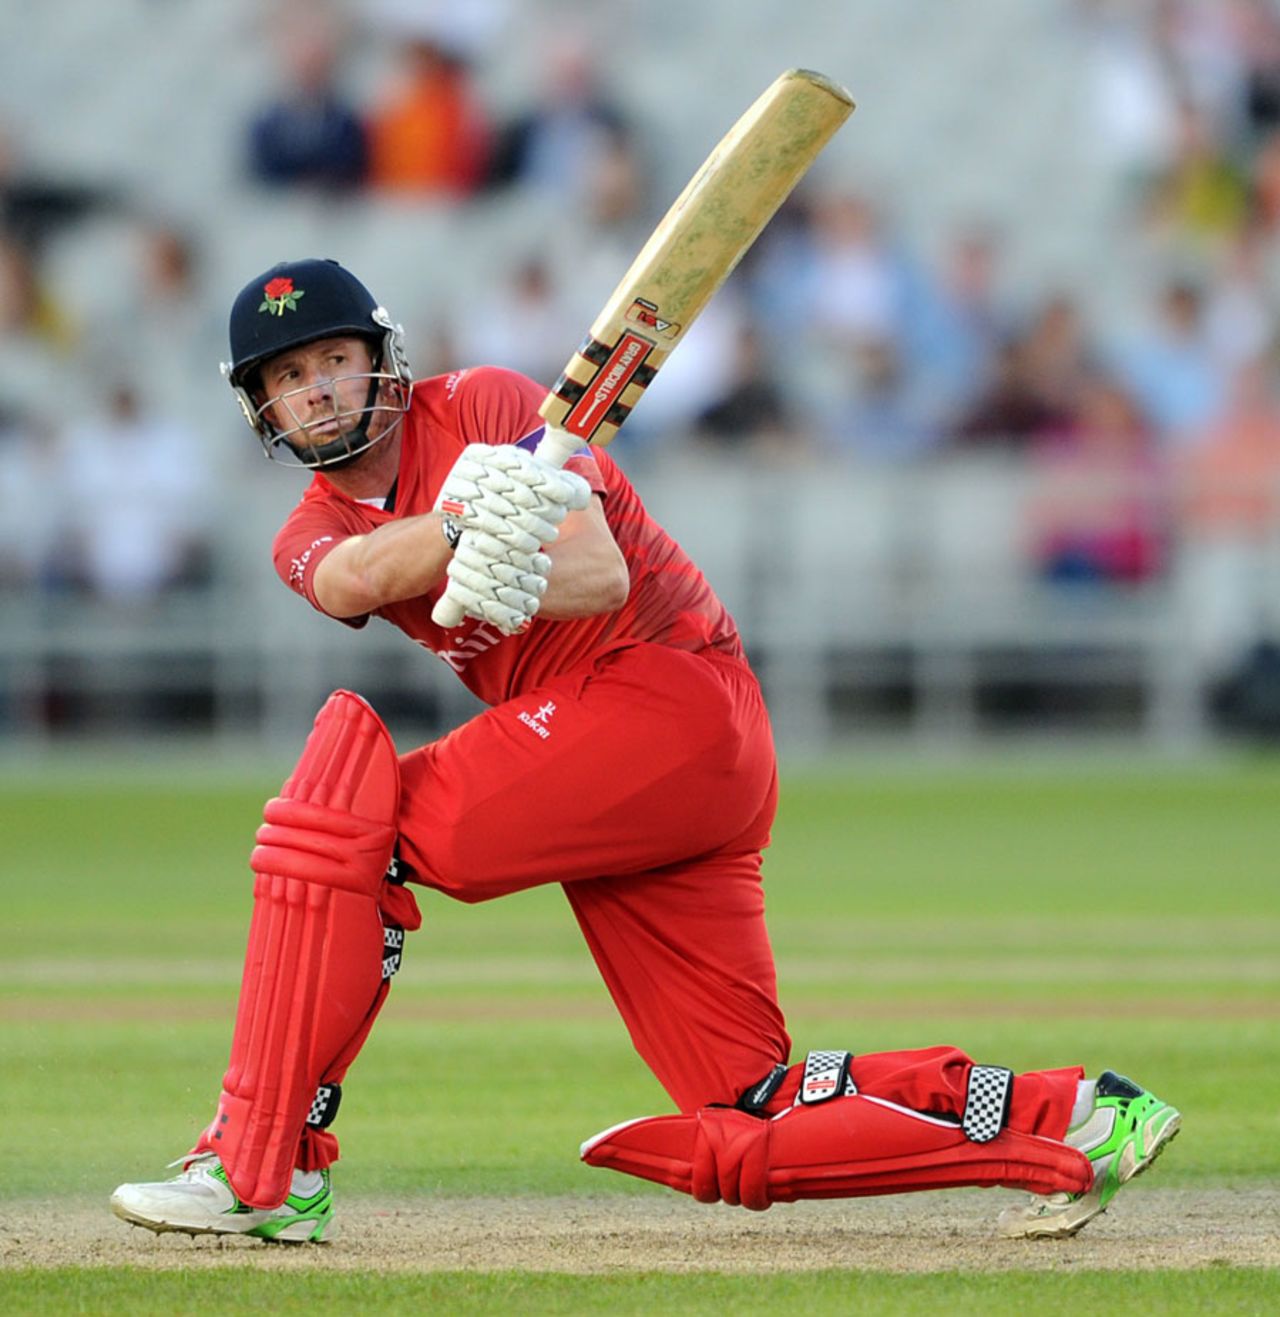 Paul Horton hit 71 off 43 balls to lift Lancashire to a matchwinning total, Lancashire v Worcestershire, NatWest T20 Blast, North Division, Old Trafford, May 18, 2014